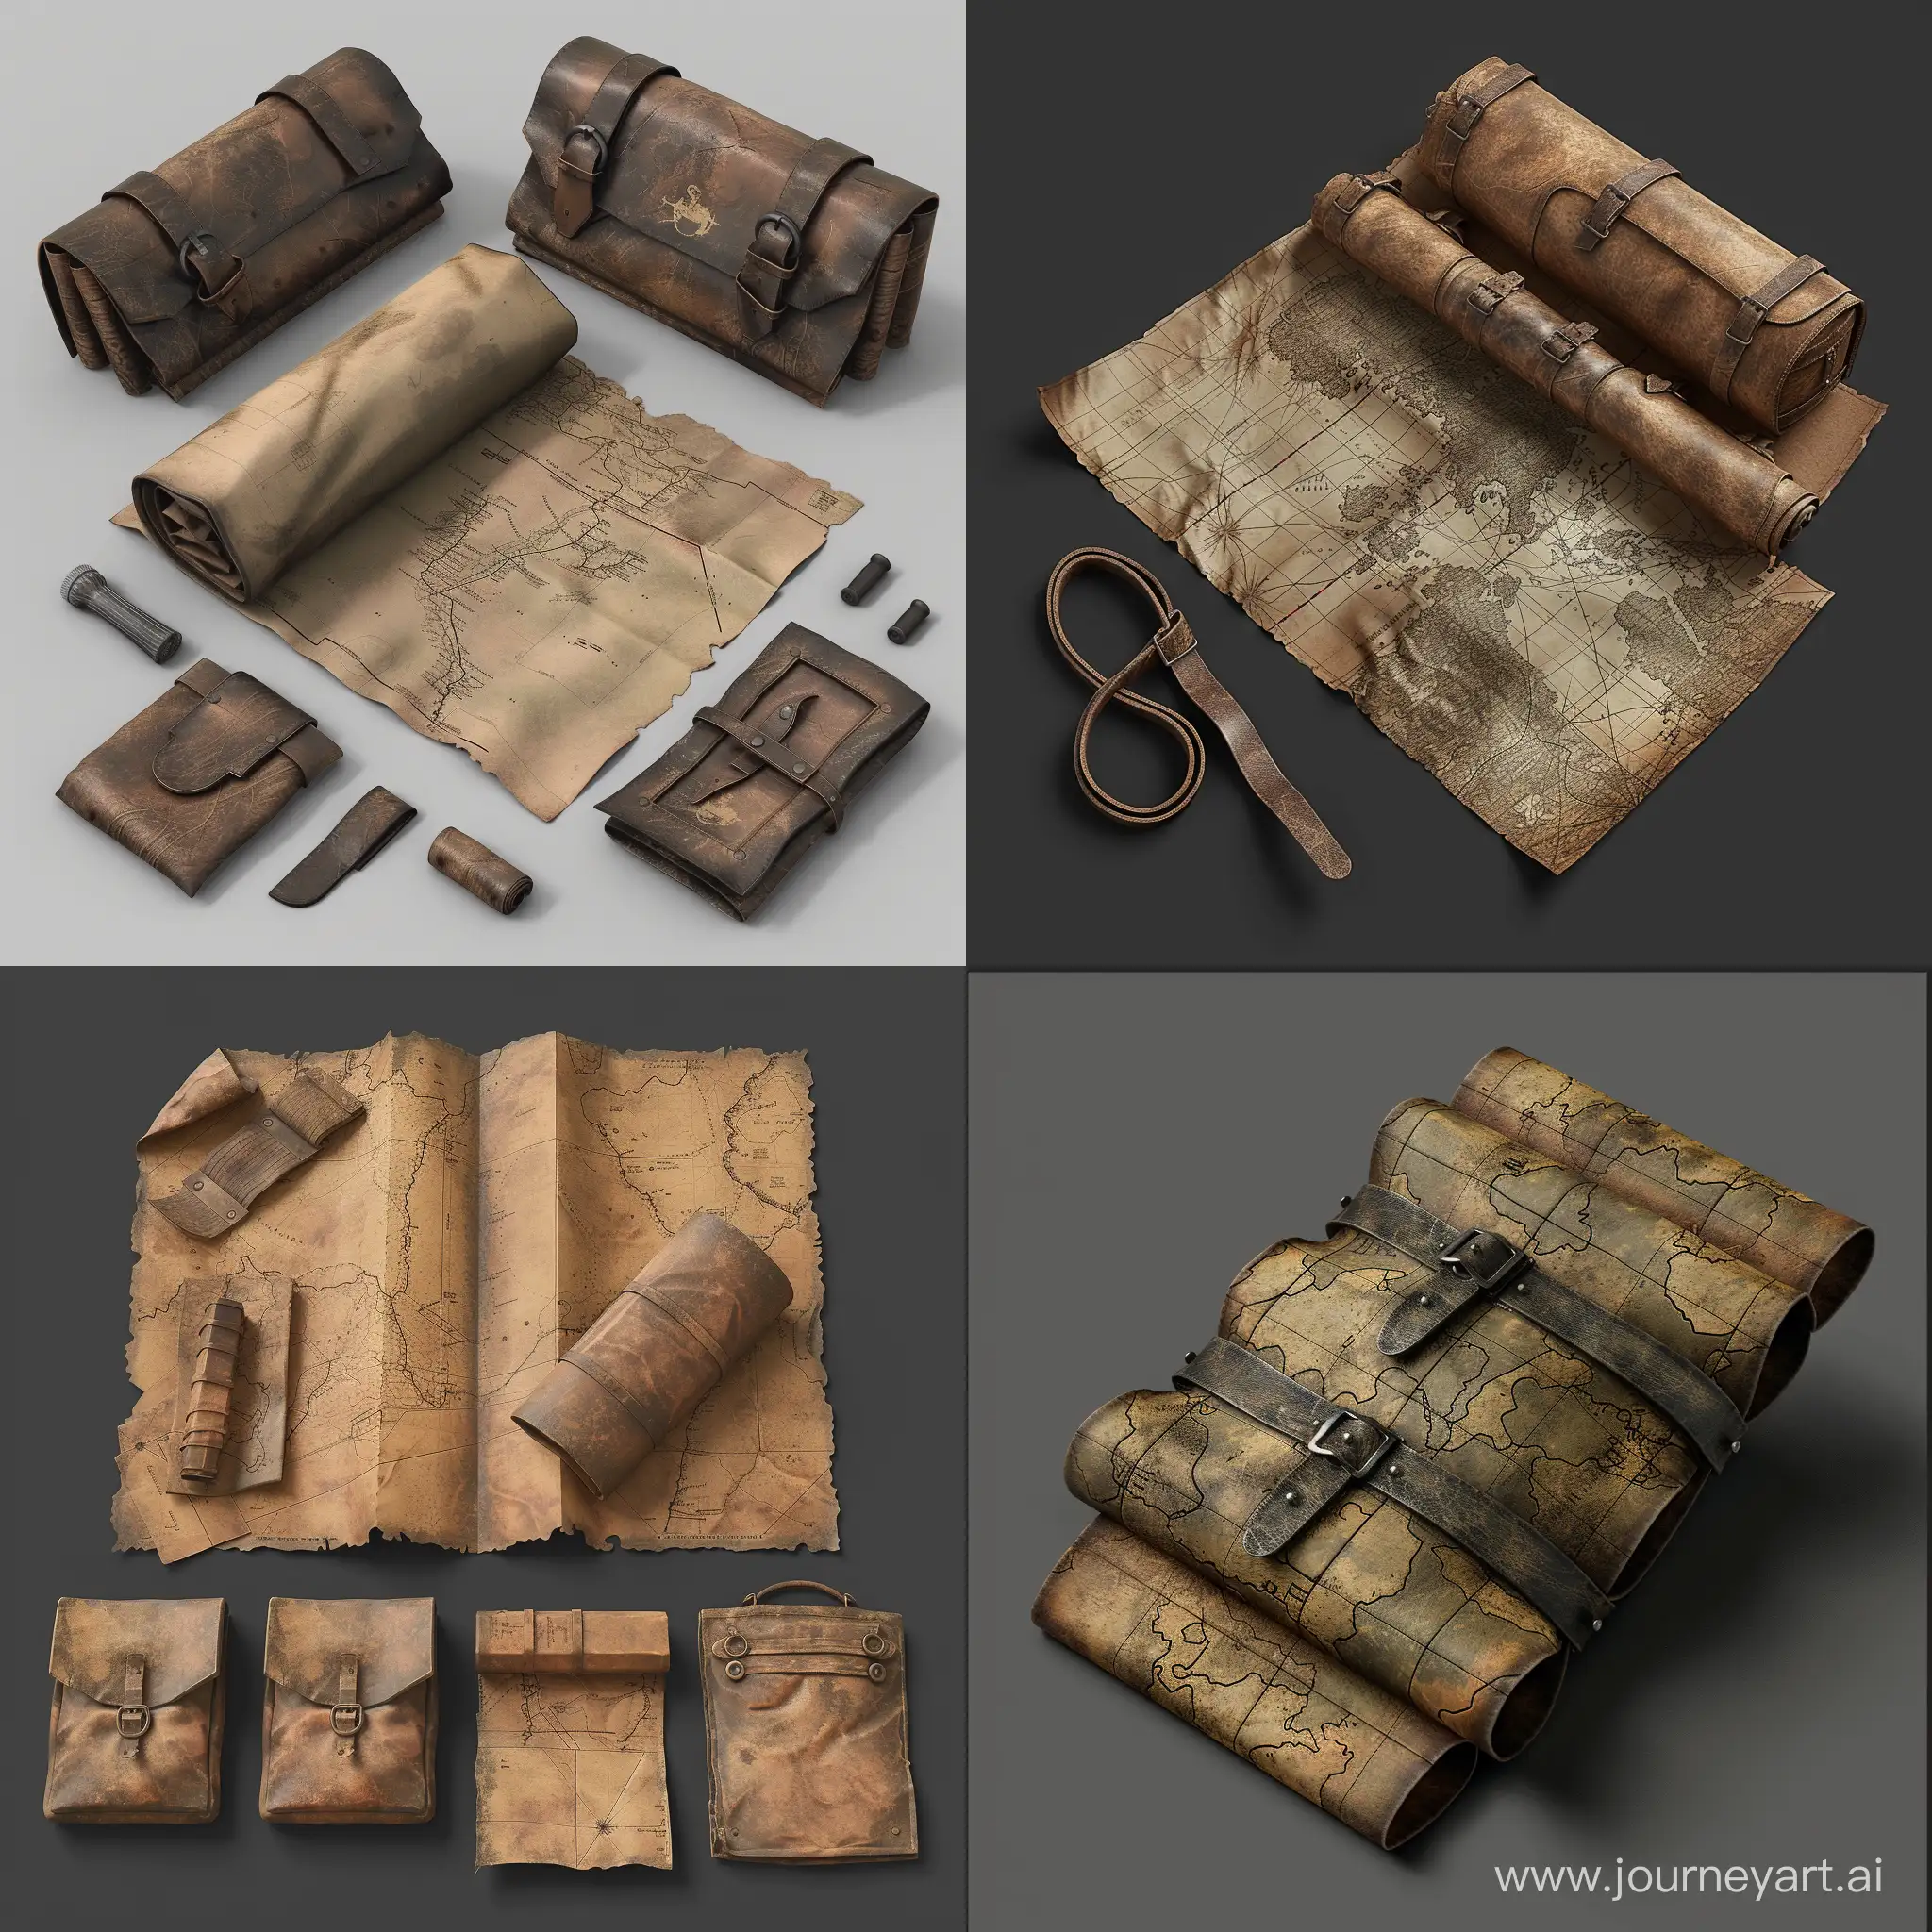 Isometric-Military-Mapping-Cartographic-Set-in-Aged-Leather-Pouch